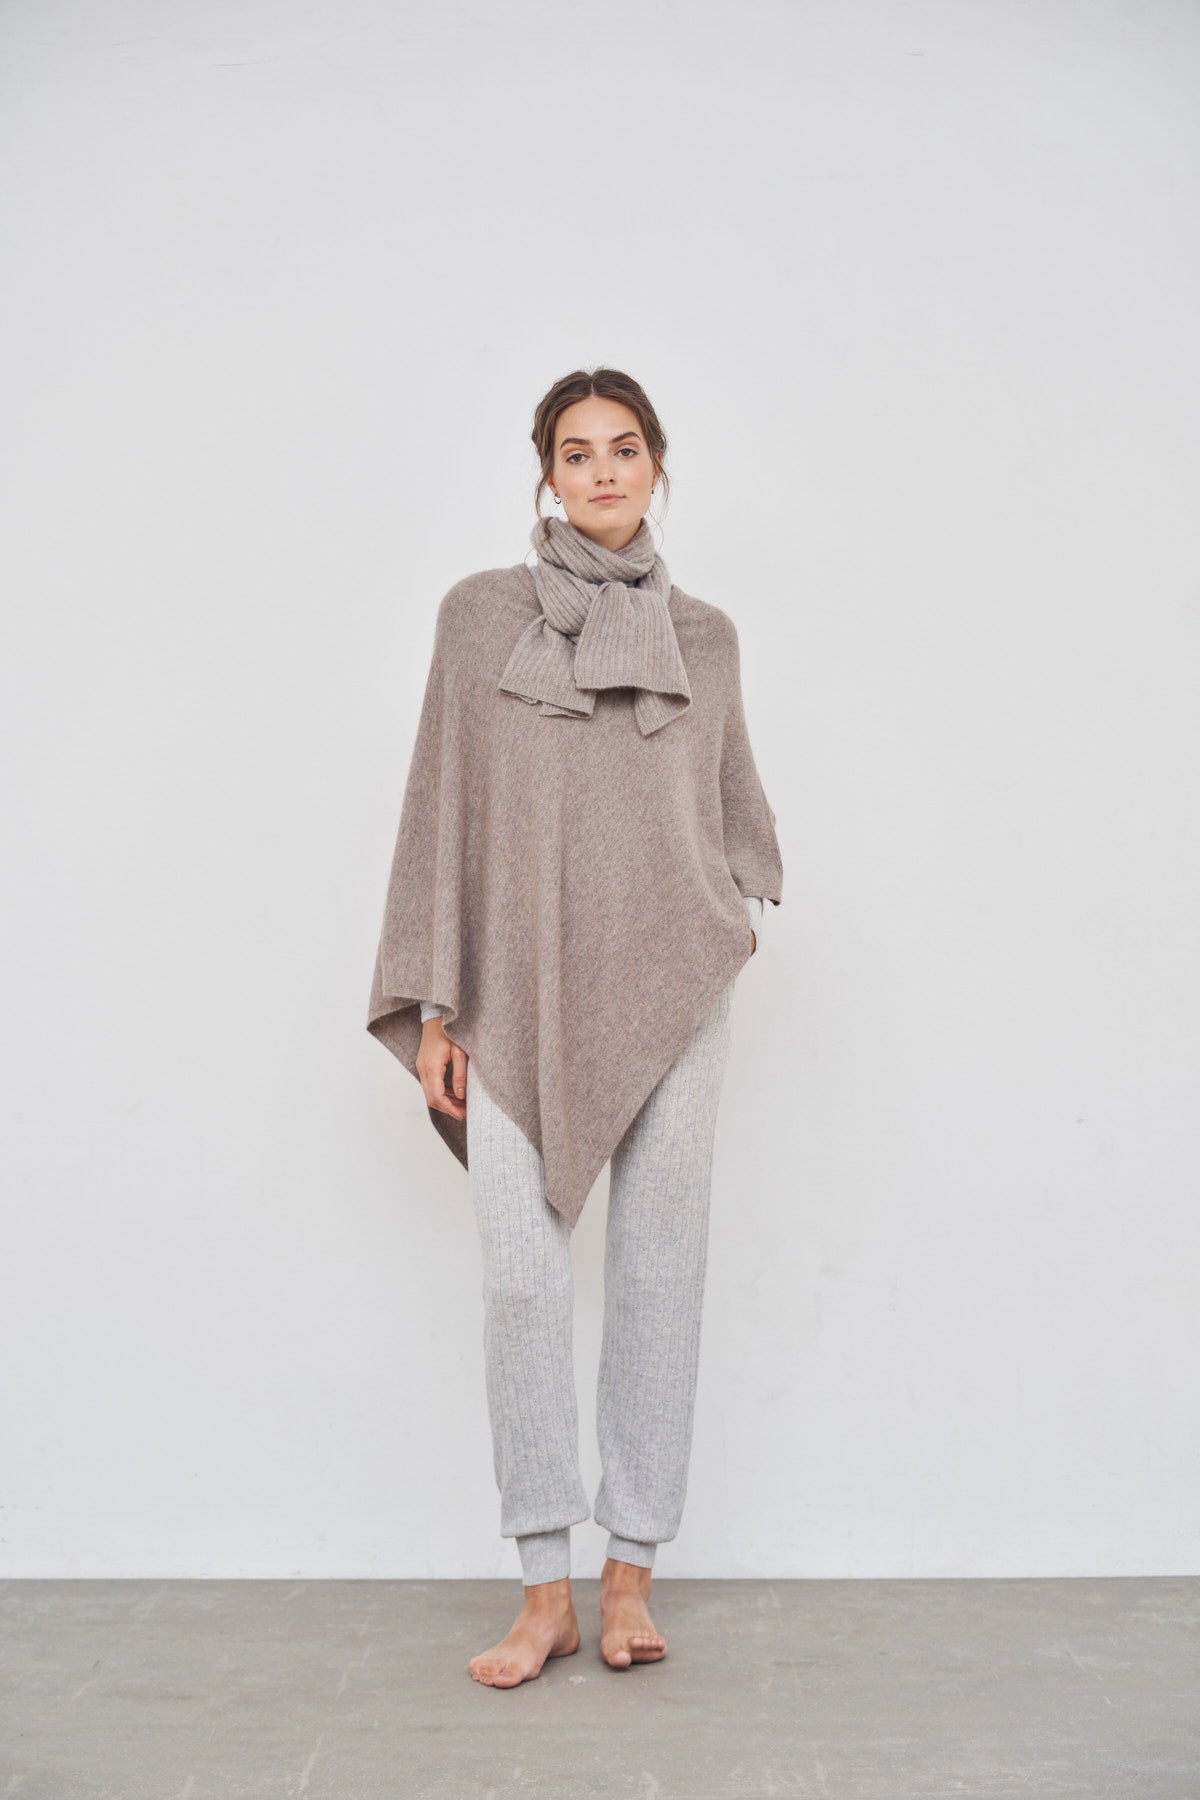 CARE BY ME 100% Cashmere Womens Lise Poncho